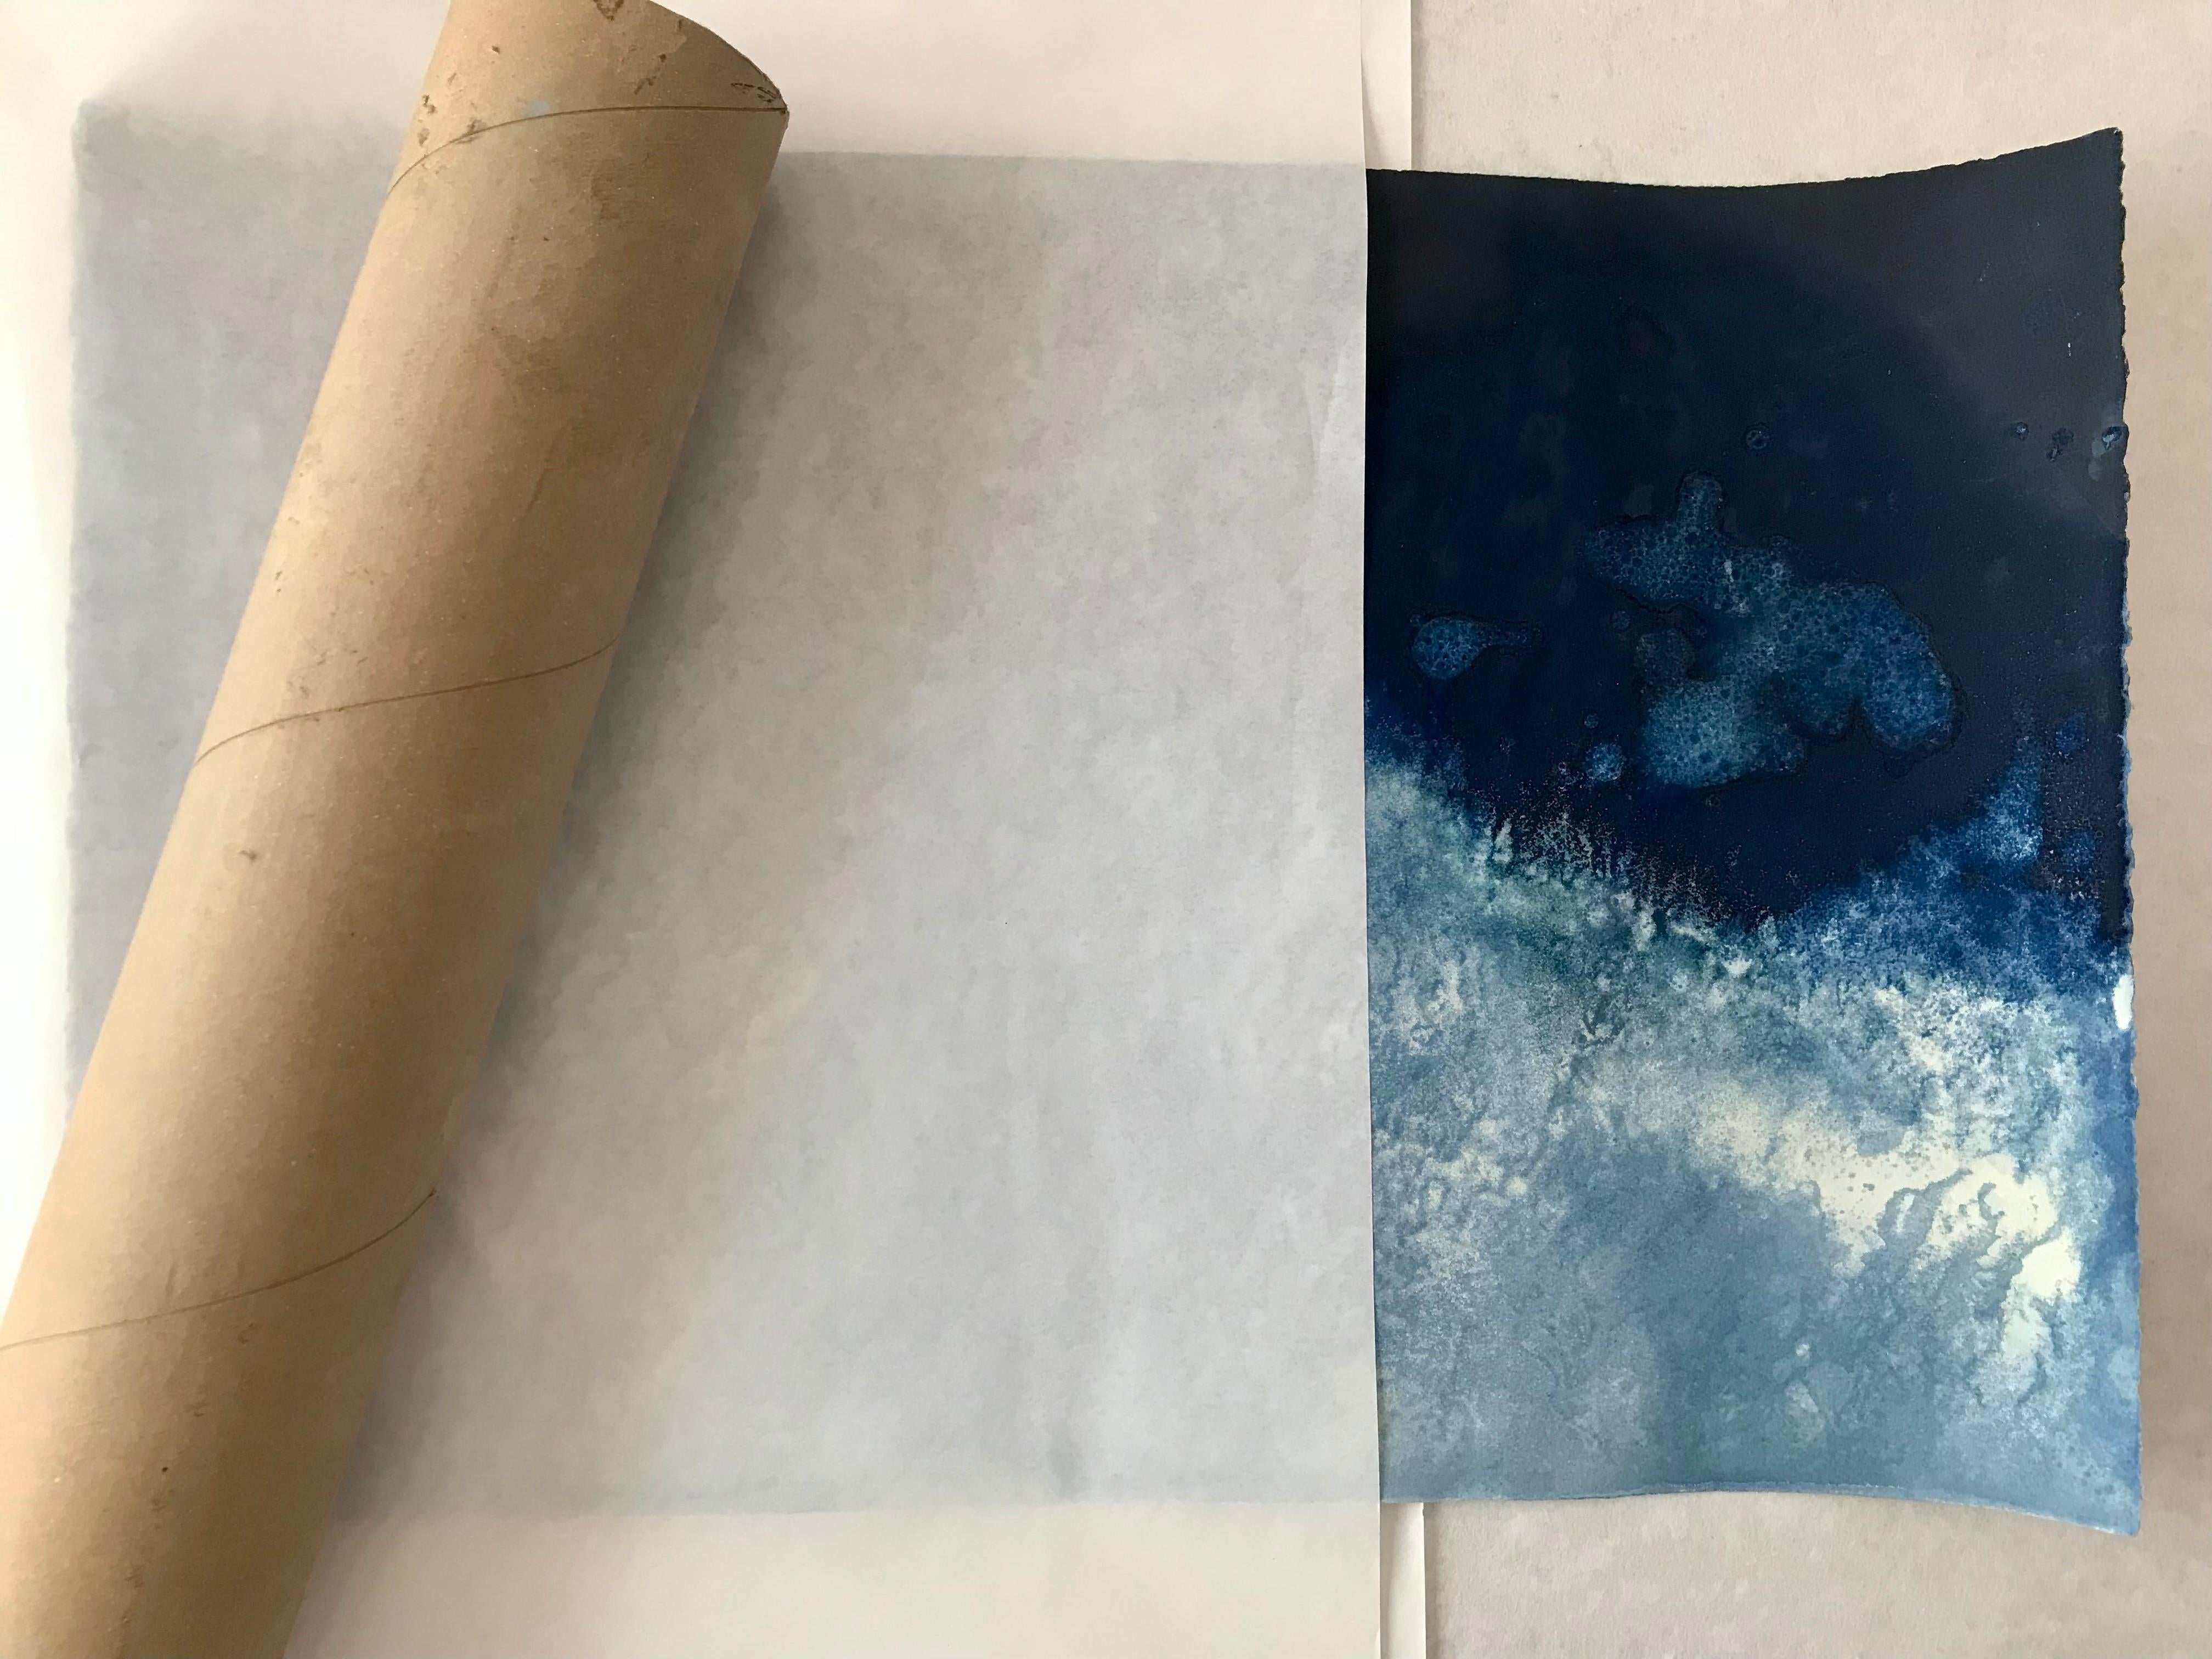 27° 42' 26.32'' N7° 42' 26.32'' W-4. Cyanotype photograph of the ocean waves - Blue Landscape Photograph by Paola Davila